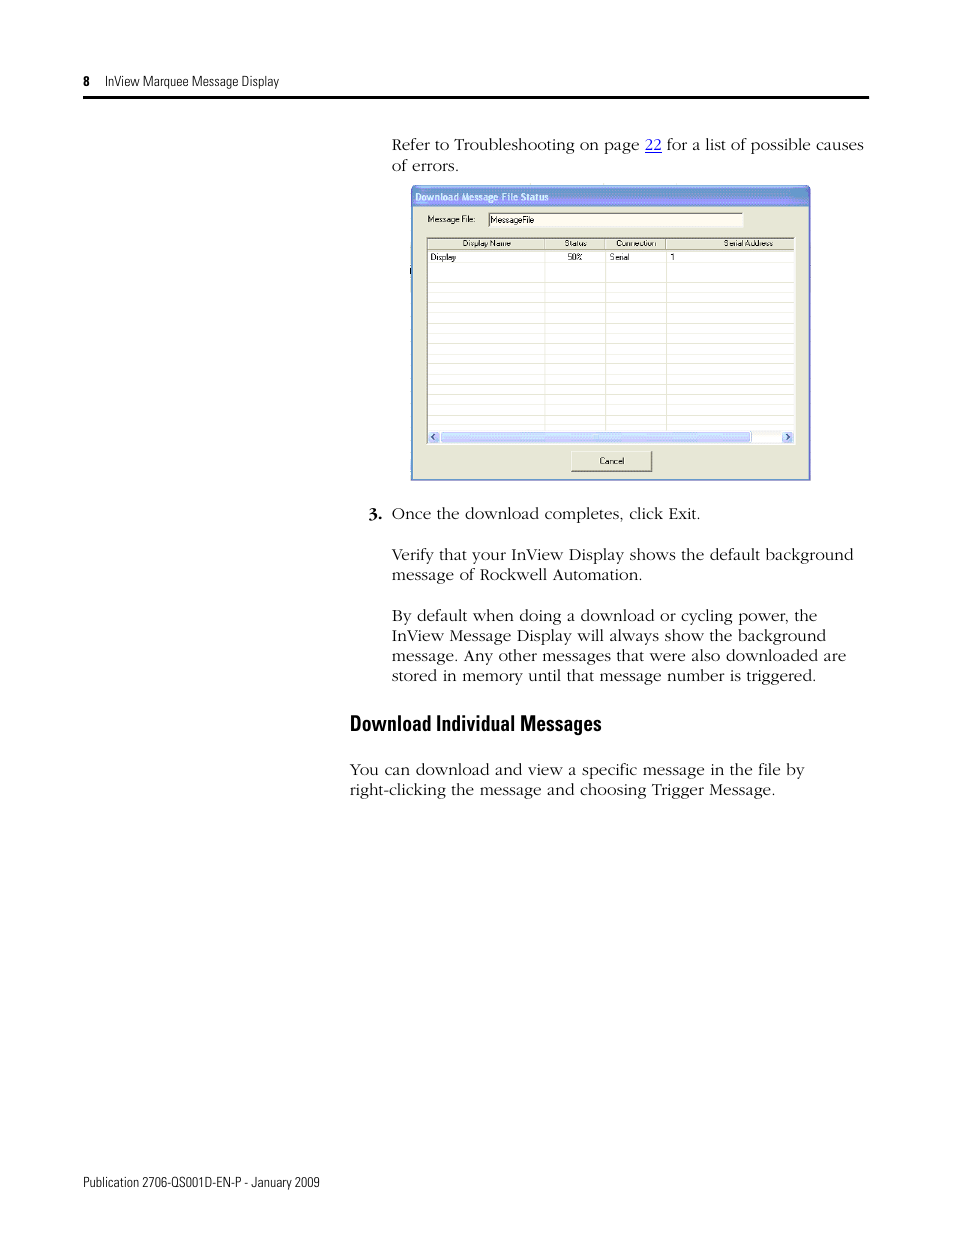 Download individual messages | Rockwell Automation 2706-P_P InView Quick Start User Manual | Page 8 / 24